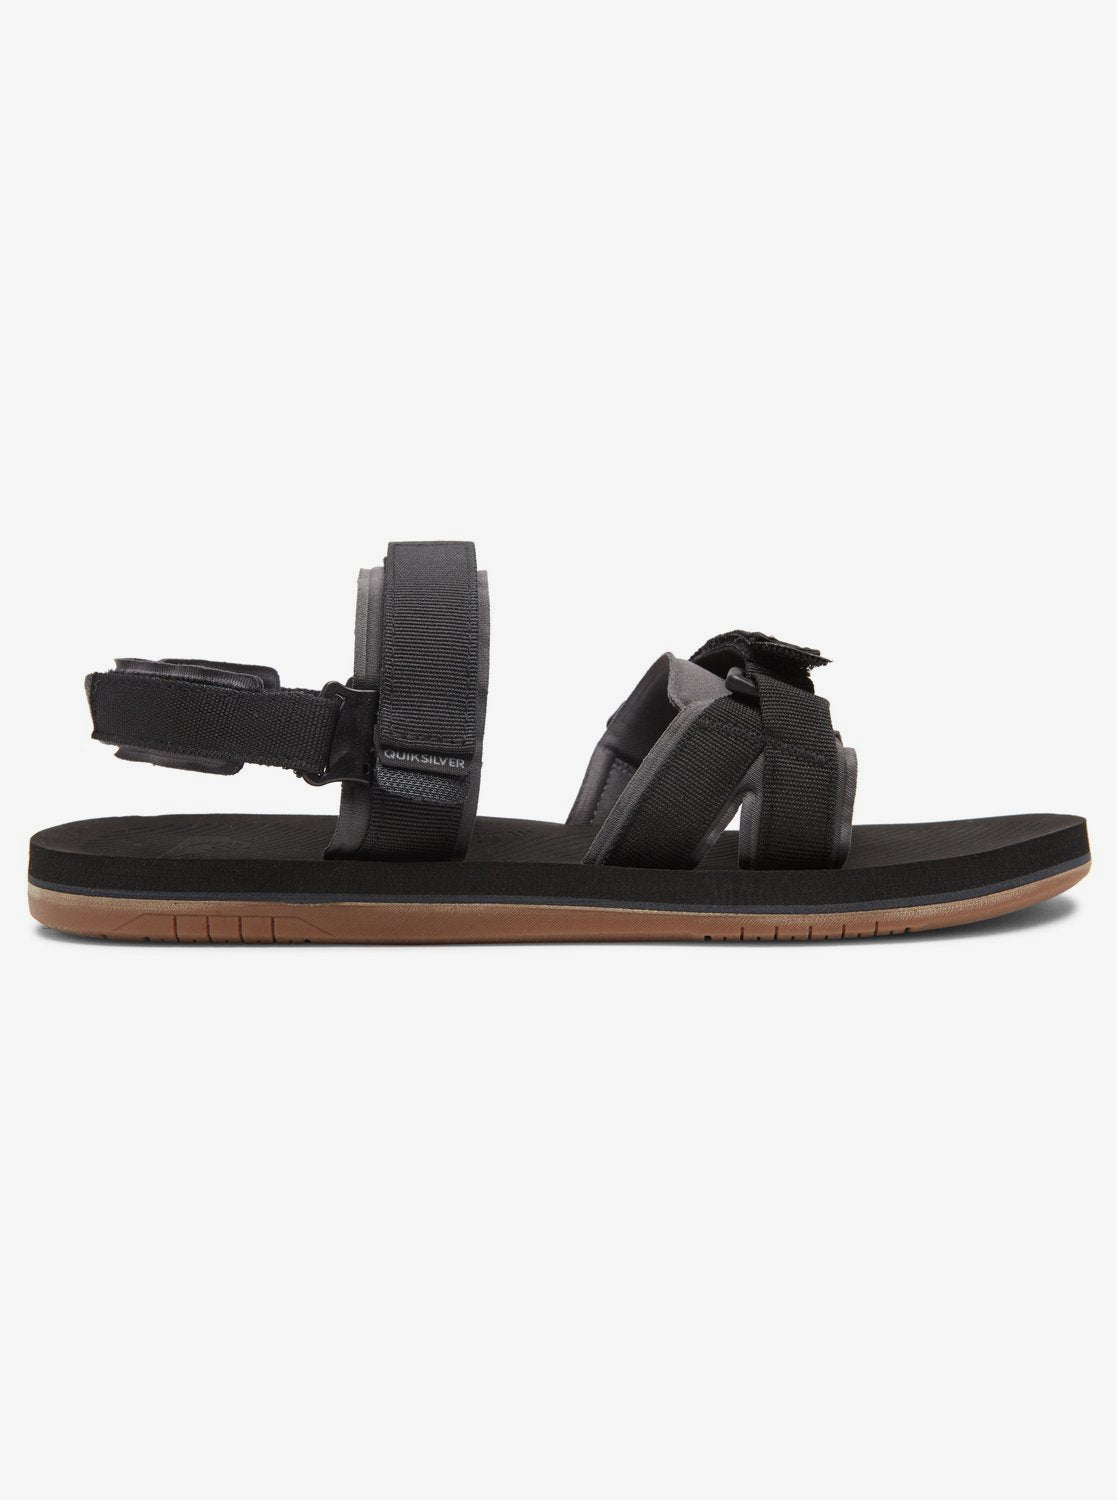 Quicksilver Caged Oasis II Sandal Black Grey Gray Brown Side